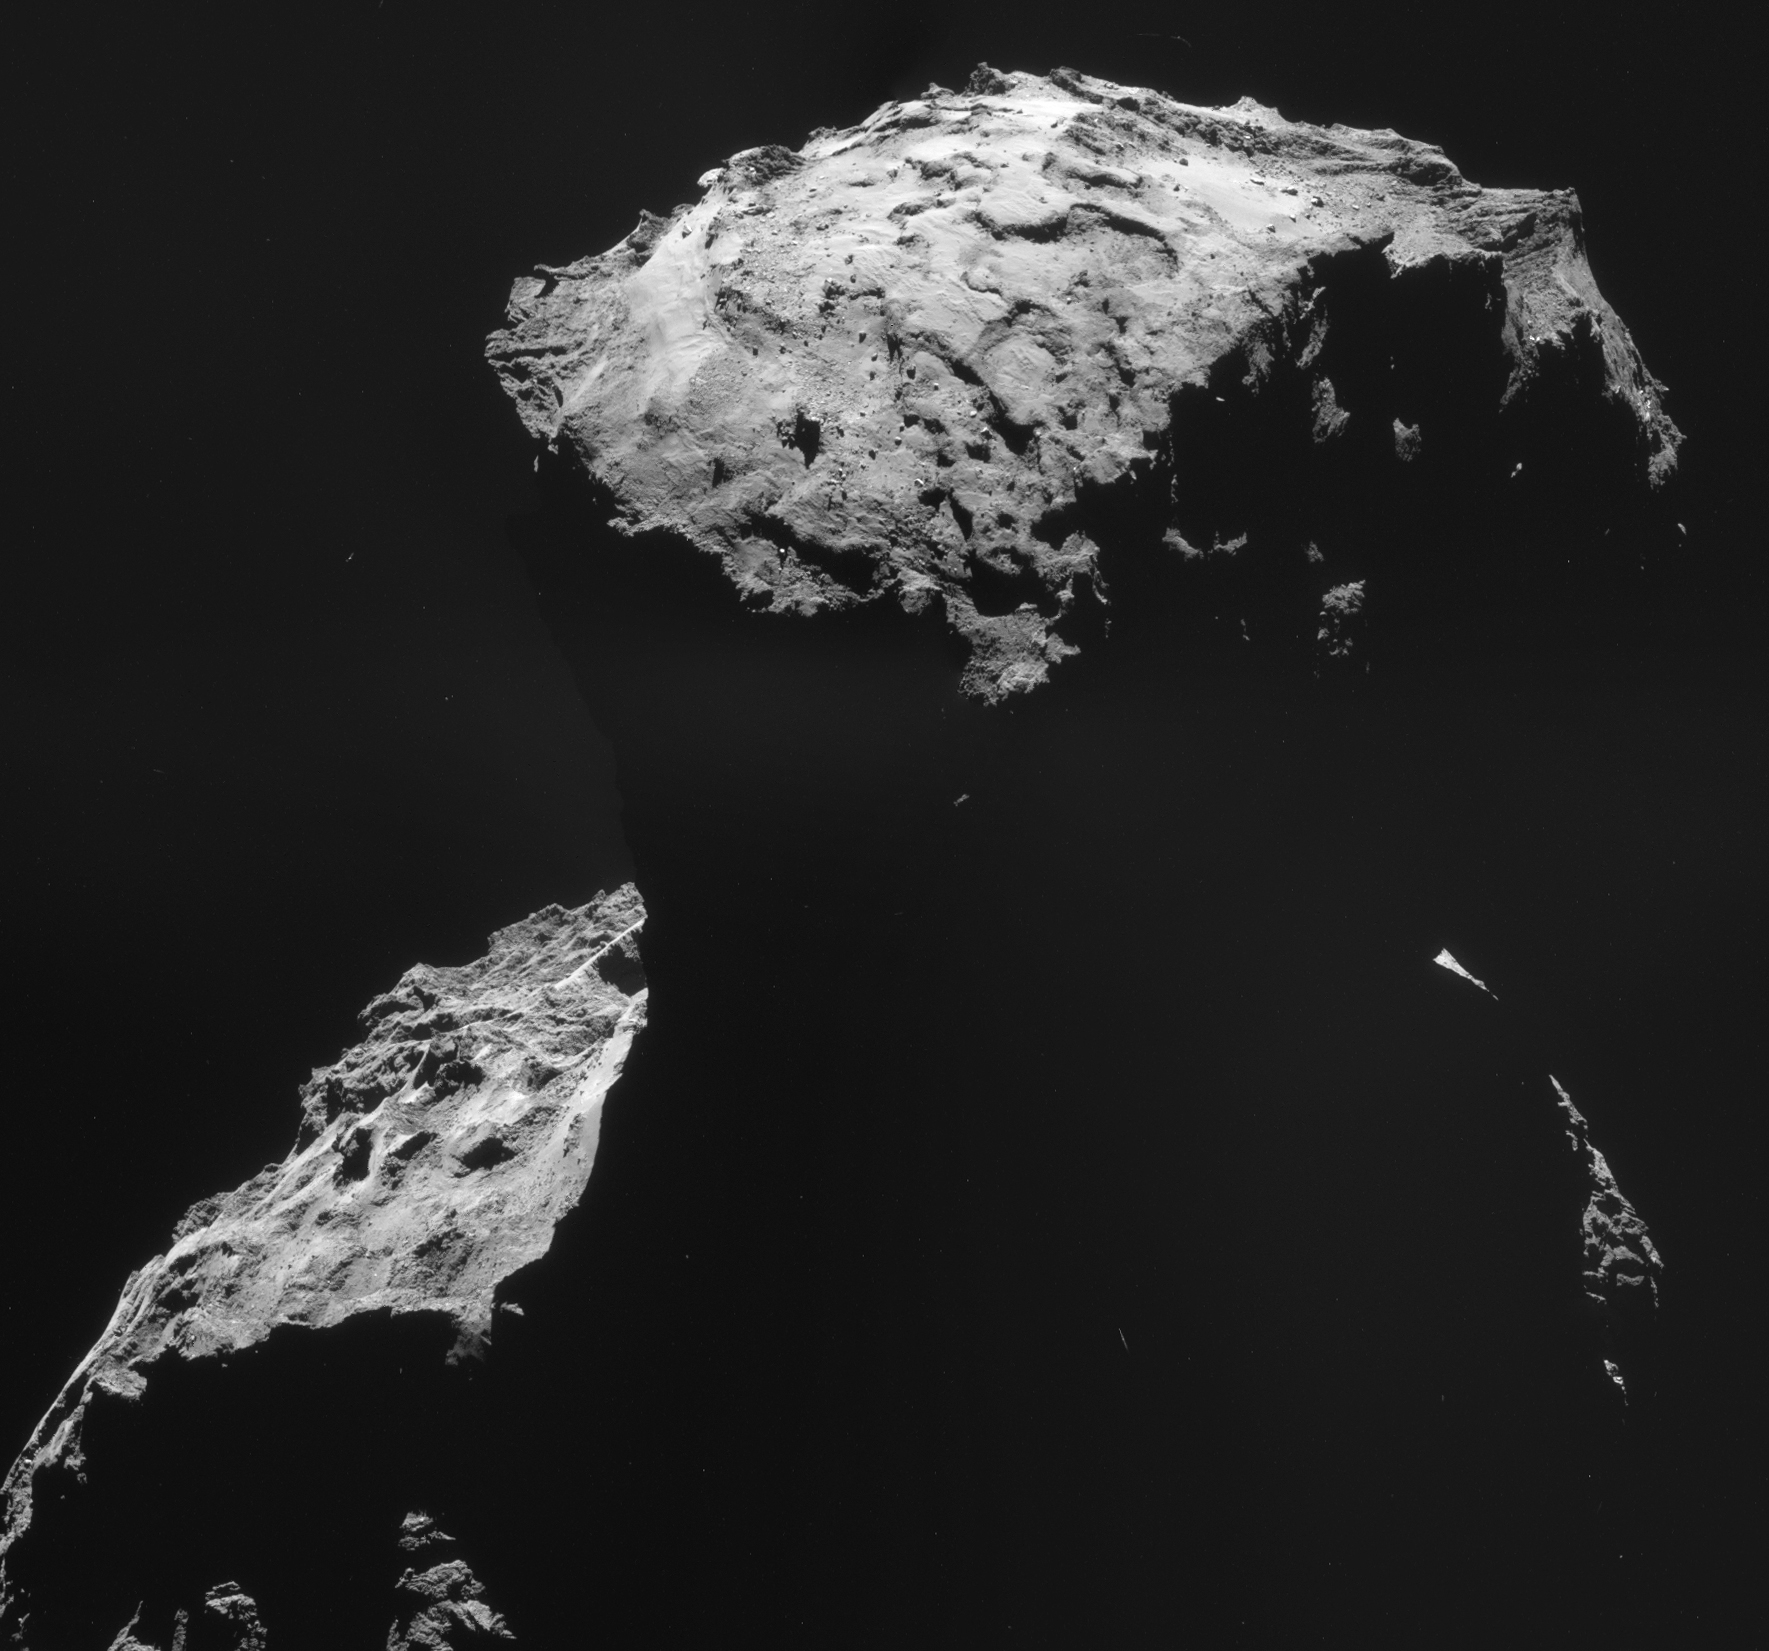 Philae’s landing site.  This four-image NAVCAM mosaic shows Philae’s landing site as Rosetta departed its 10 km orbit on 30 October, when the spacecraft was 26.8 km from the centre of the comet.  ESA/Rosetta/NAVCAM – CC BY-SA IGO 3.0